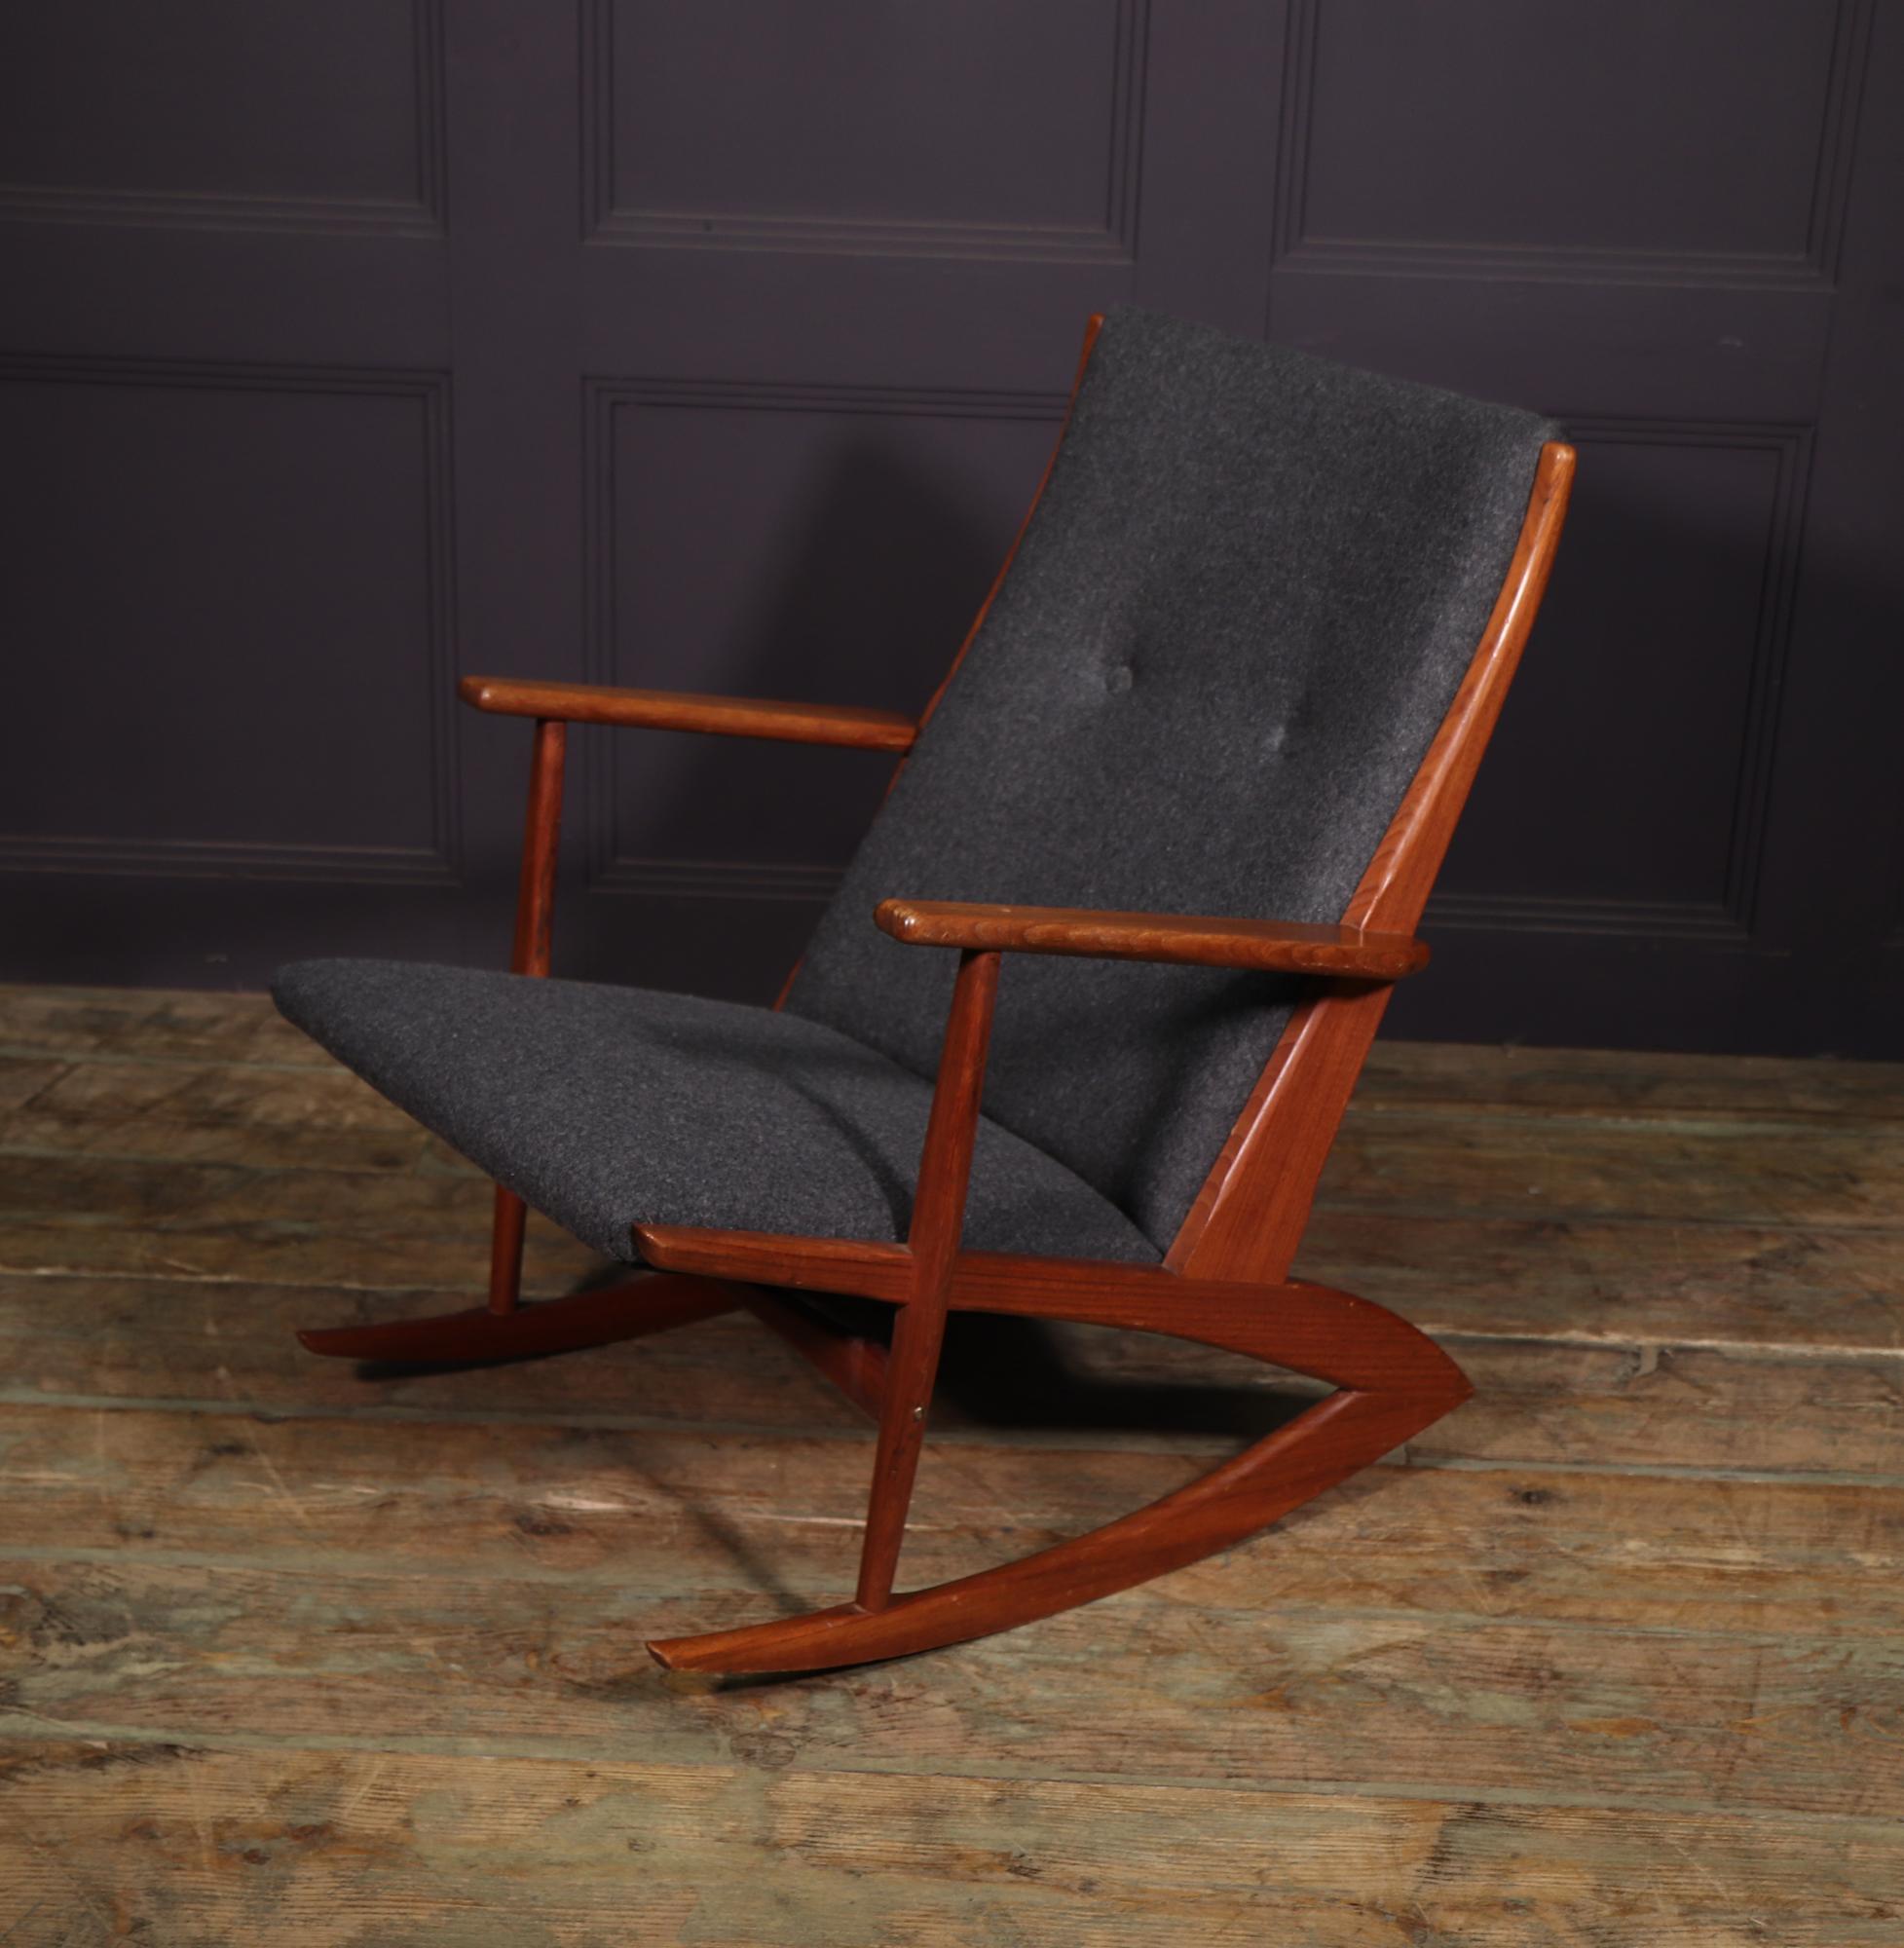 A model97 rocking chair designed by Georg Jensen and produced by kubus in Denmark in the mid 1950’s, the frame is solid teak with good colour and is great condition, the upholstery has been fully replaced and re covered in charcoal colour wool felt